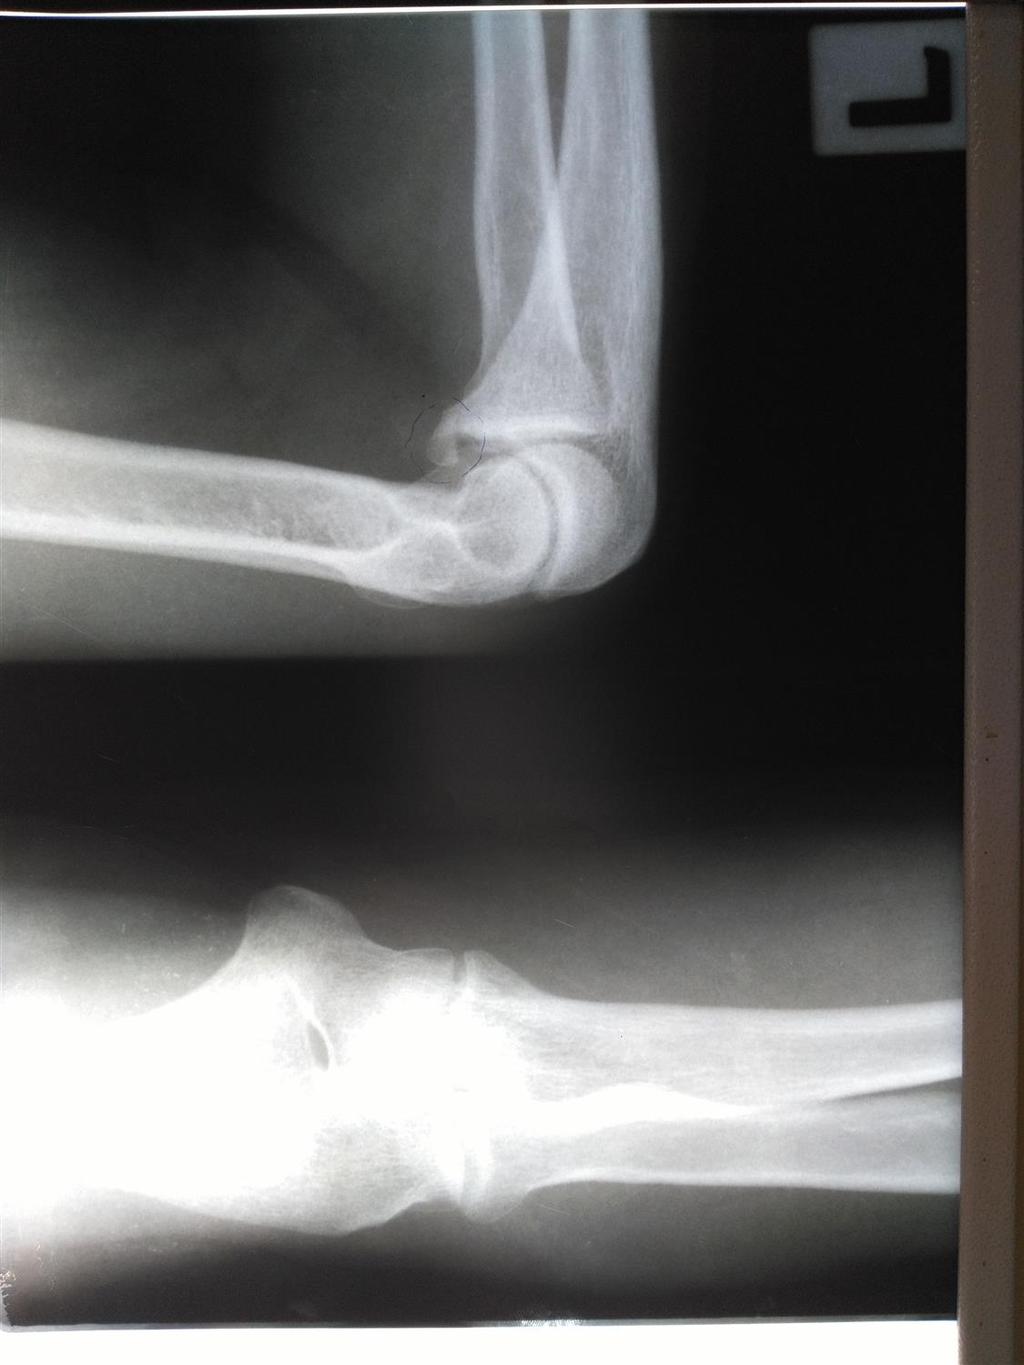 ORIF, and may be a sign of elbow subluxation or dislocation. They occur with FOOSH and elbow hyperextension, and present with pain over the antecubital fossa.